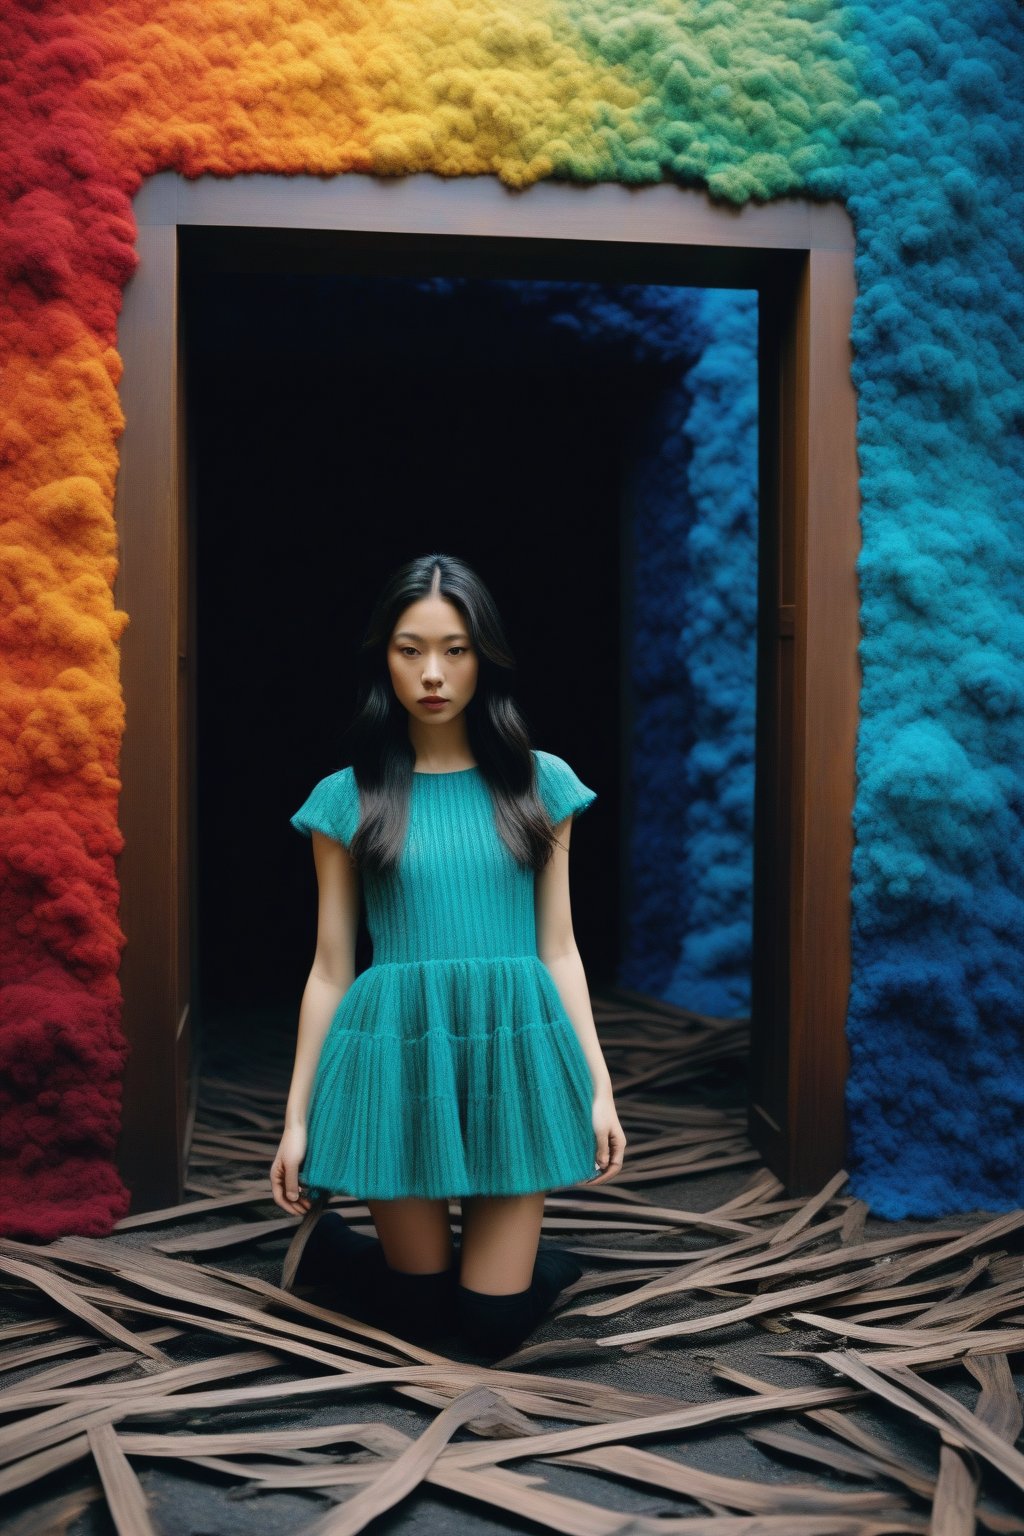 1 asian girl, Annie Leibovitz, Maximalist, Dark, Colorless, dark white splash, Dark Wave Art, Motion blur, dense dungeon with Red oak, Velvet, Greed, absurdres, Polaroid, F/2.8, RAW photo, Franklin Booth, Sickening, Peaceful, Pastel Colors, Soutache, Land Art, cinematic lighting, [Kevlar|Mohair], Sea, Flickr, Nikon d3300, F/1.8, Cycles render, Oleg Korolev, Elastic, Cozy, Monochrome, electric green palette, Post-Rock, Moonlight, Metal, Building, photolab, Canon 5d mark 4, 800mm lens, Fractal, deep indigo ("The Gate":1.3) , it is very Jagged and Sexy, Doug Aitken, [Intensive|Striking], Relieving, One Color, Paint splotches, Emo Art, side light, Clay, Gluttony, 64K, Lomography Color 100, Lyubov Popova, Rainbow, Lustful, Film Washi, Swirling Silver, Modern European Ink Painting, Side lighting, Wood, Pandora, hyperdetailed, Phase One XF IQ4 150MP, Oliver Jeffers, Explosive, Joyful, Agfacolor, electric blue and Gold dust particles, Geometric Style, Sun Rays, Paper, [Beauty|Performance], extremely detailed CG Unity 8k wallpaper, Sony A9 II, Zoe Buckman, Otherworldly, Light, Ambrotype, blended visuals, Classicism Art, Moonlit, Runes, Justification, 4K, Fujicolor Superia X-TRA 400, Penelope Rosemont, Moist, Zen, Cathode tube, de dia los muertos, moody lighting, [Merino wool|Latex], Progress, award winning, Kodak Portra 160, Bela Tarr, Striped, Fairy-Tale, CineColor, made of Angora wool, Neo-Fauvism, Dramatic spotlight, Alligator skin, Haste, contest winner, Canon RF, Gabriele Münter, Grand, Suffering, complementary colors, overlapping compositions, Memecore Art, Bloom light, Flannel, Darkness, Highres, Ilford HP5, Edward Atkinson Hornel, Disgusting, Romantic, Fujifilm Superia, caustics, Serial Art, rim light, Scales, Death, extremely hyper aesthetic, Fujicolor C200